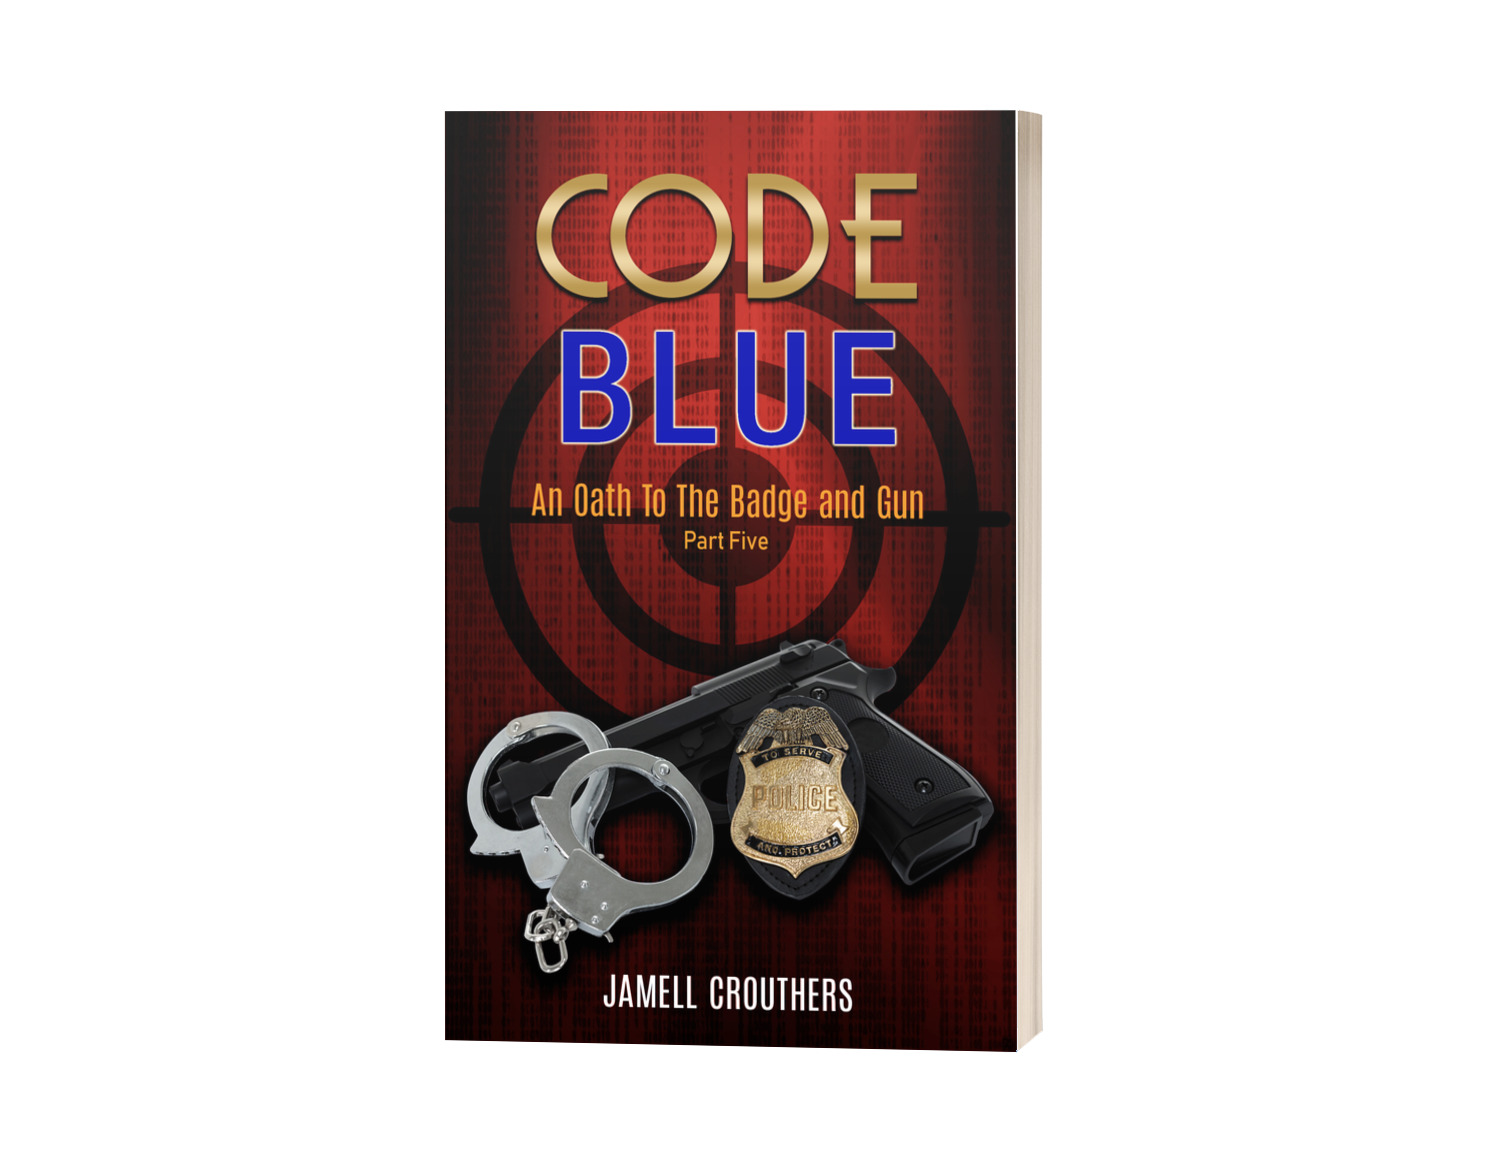 Code Blue Part 5 is the ending of the series as Gary reflects on what was, leaving the police force and having a new opportunity to do what he loves still...